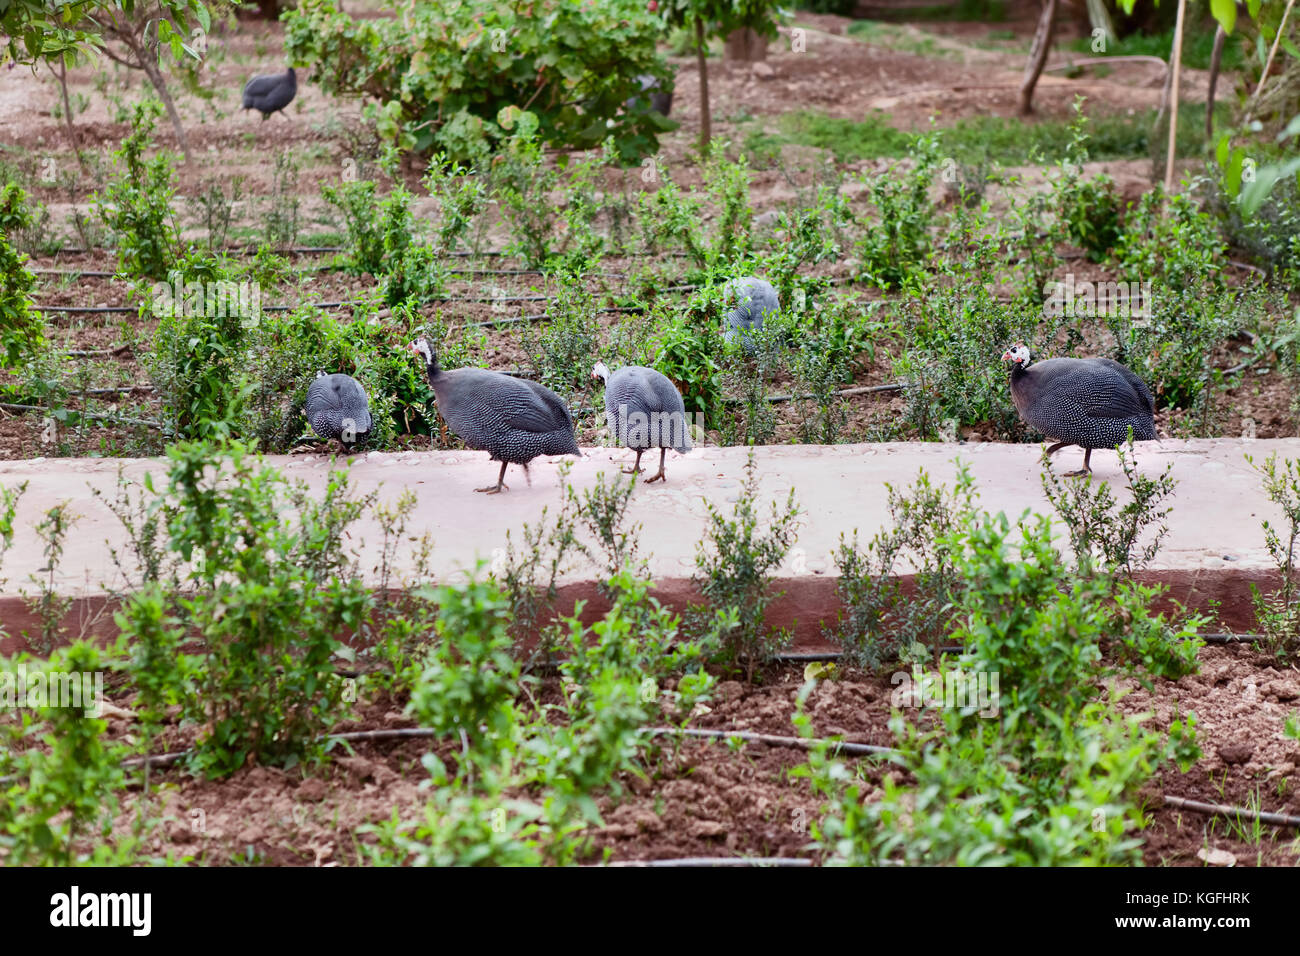 Group of Guinea Fowls on grass Stock Photo